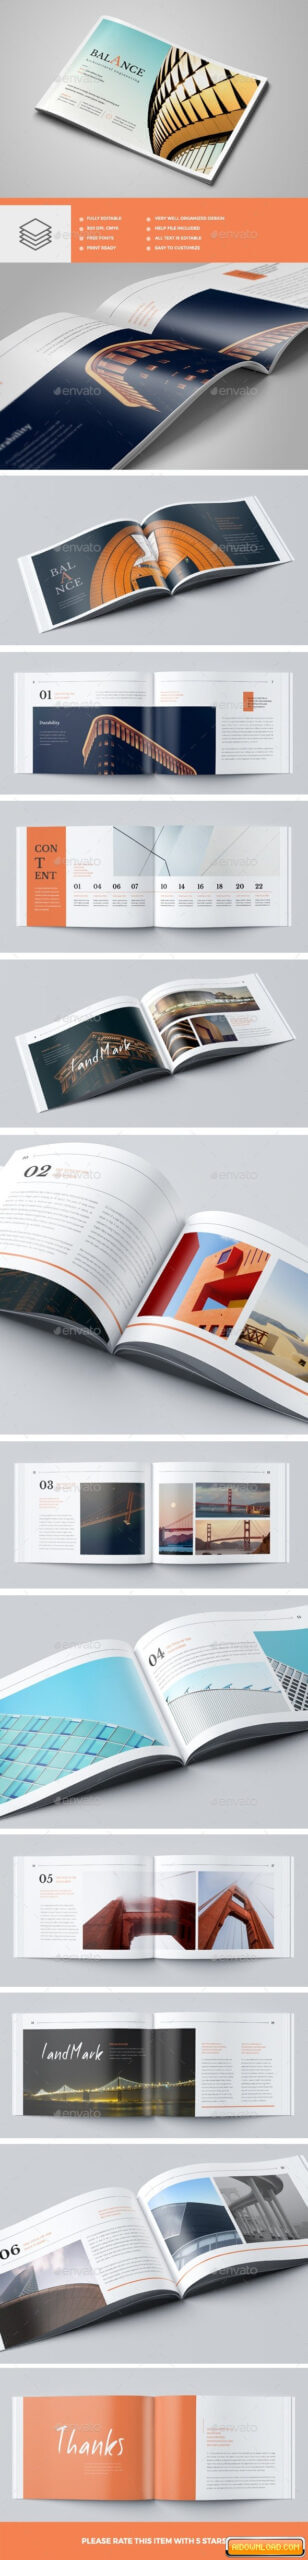 Architecture Brochure Templates Free Download – Calep For Architecture Brochure Templates Free Download